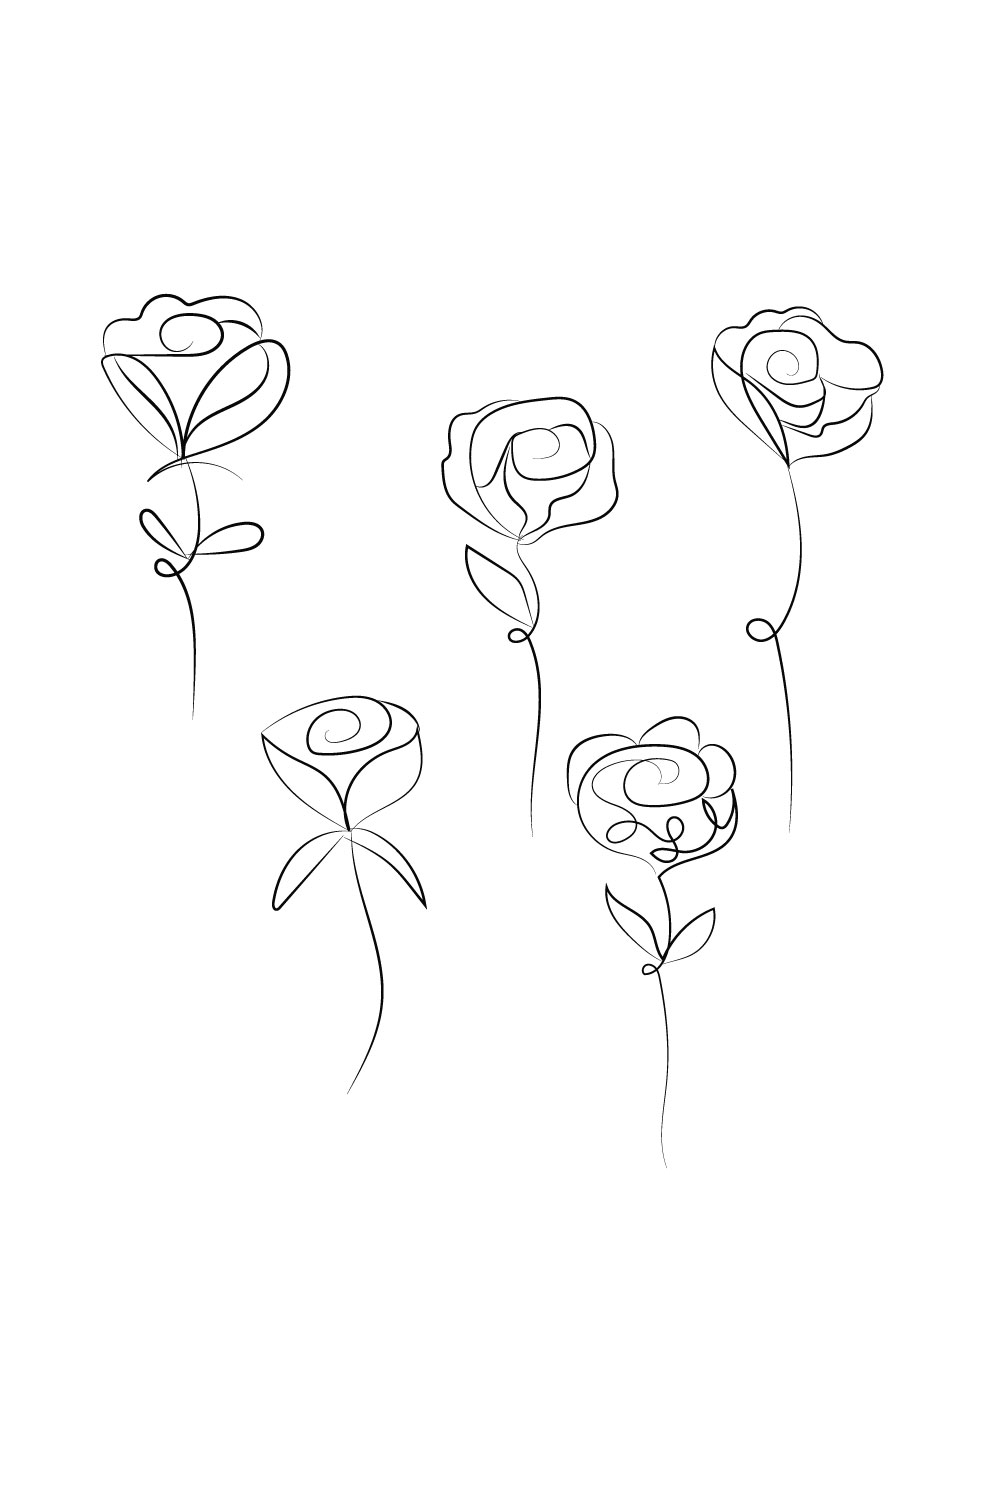 Cute Rose drowing pinterest preview image.